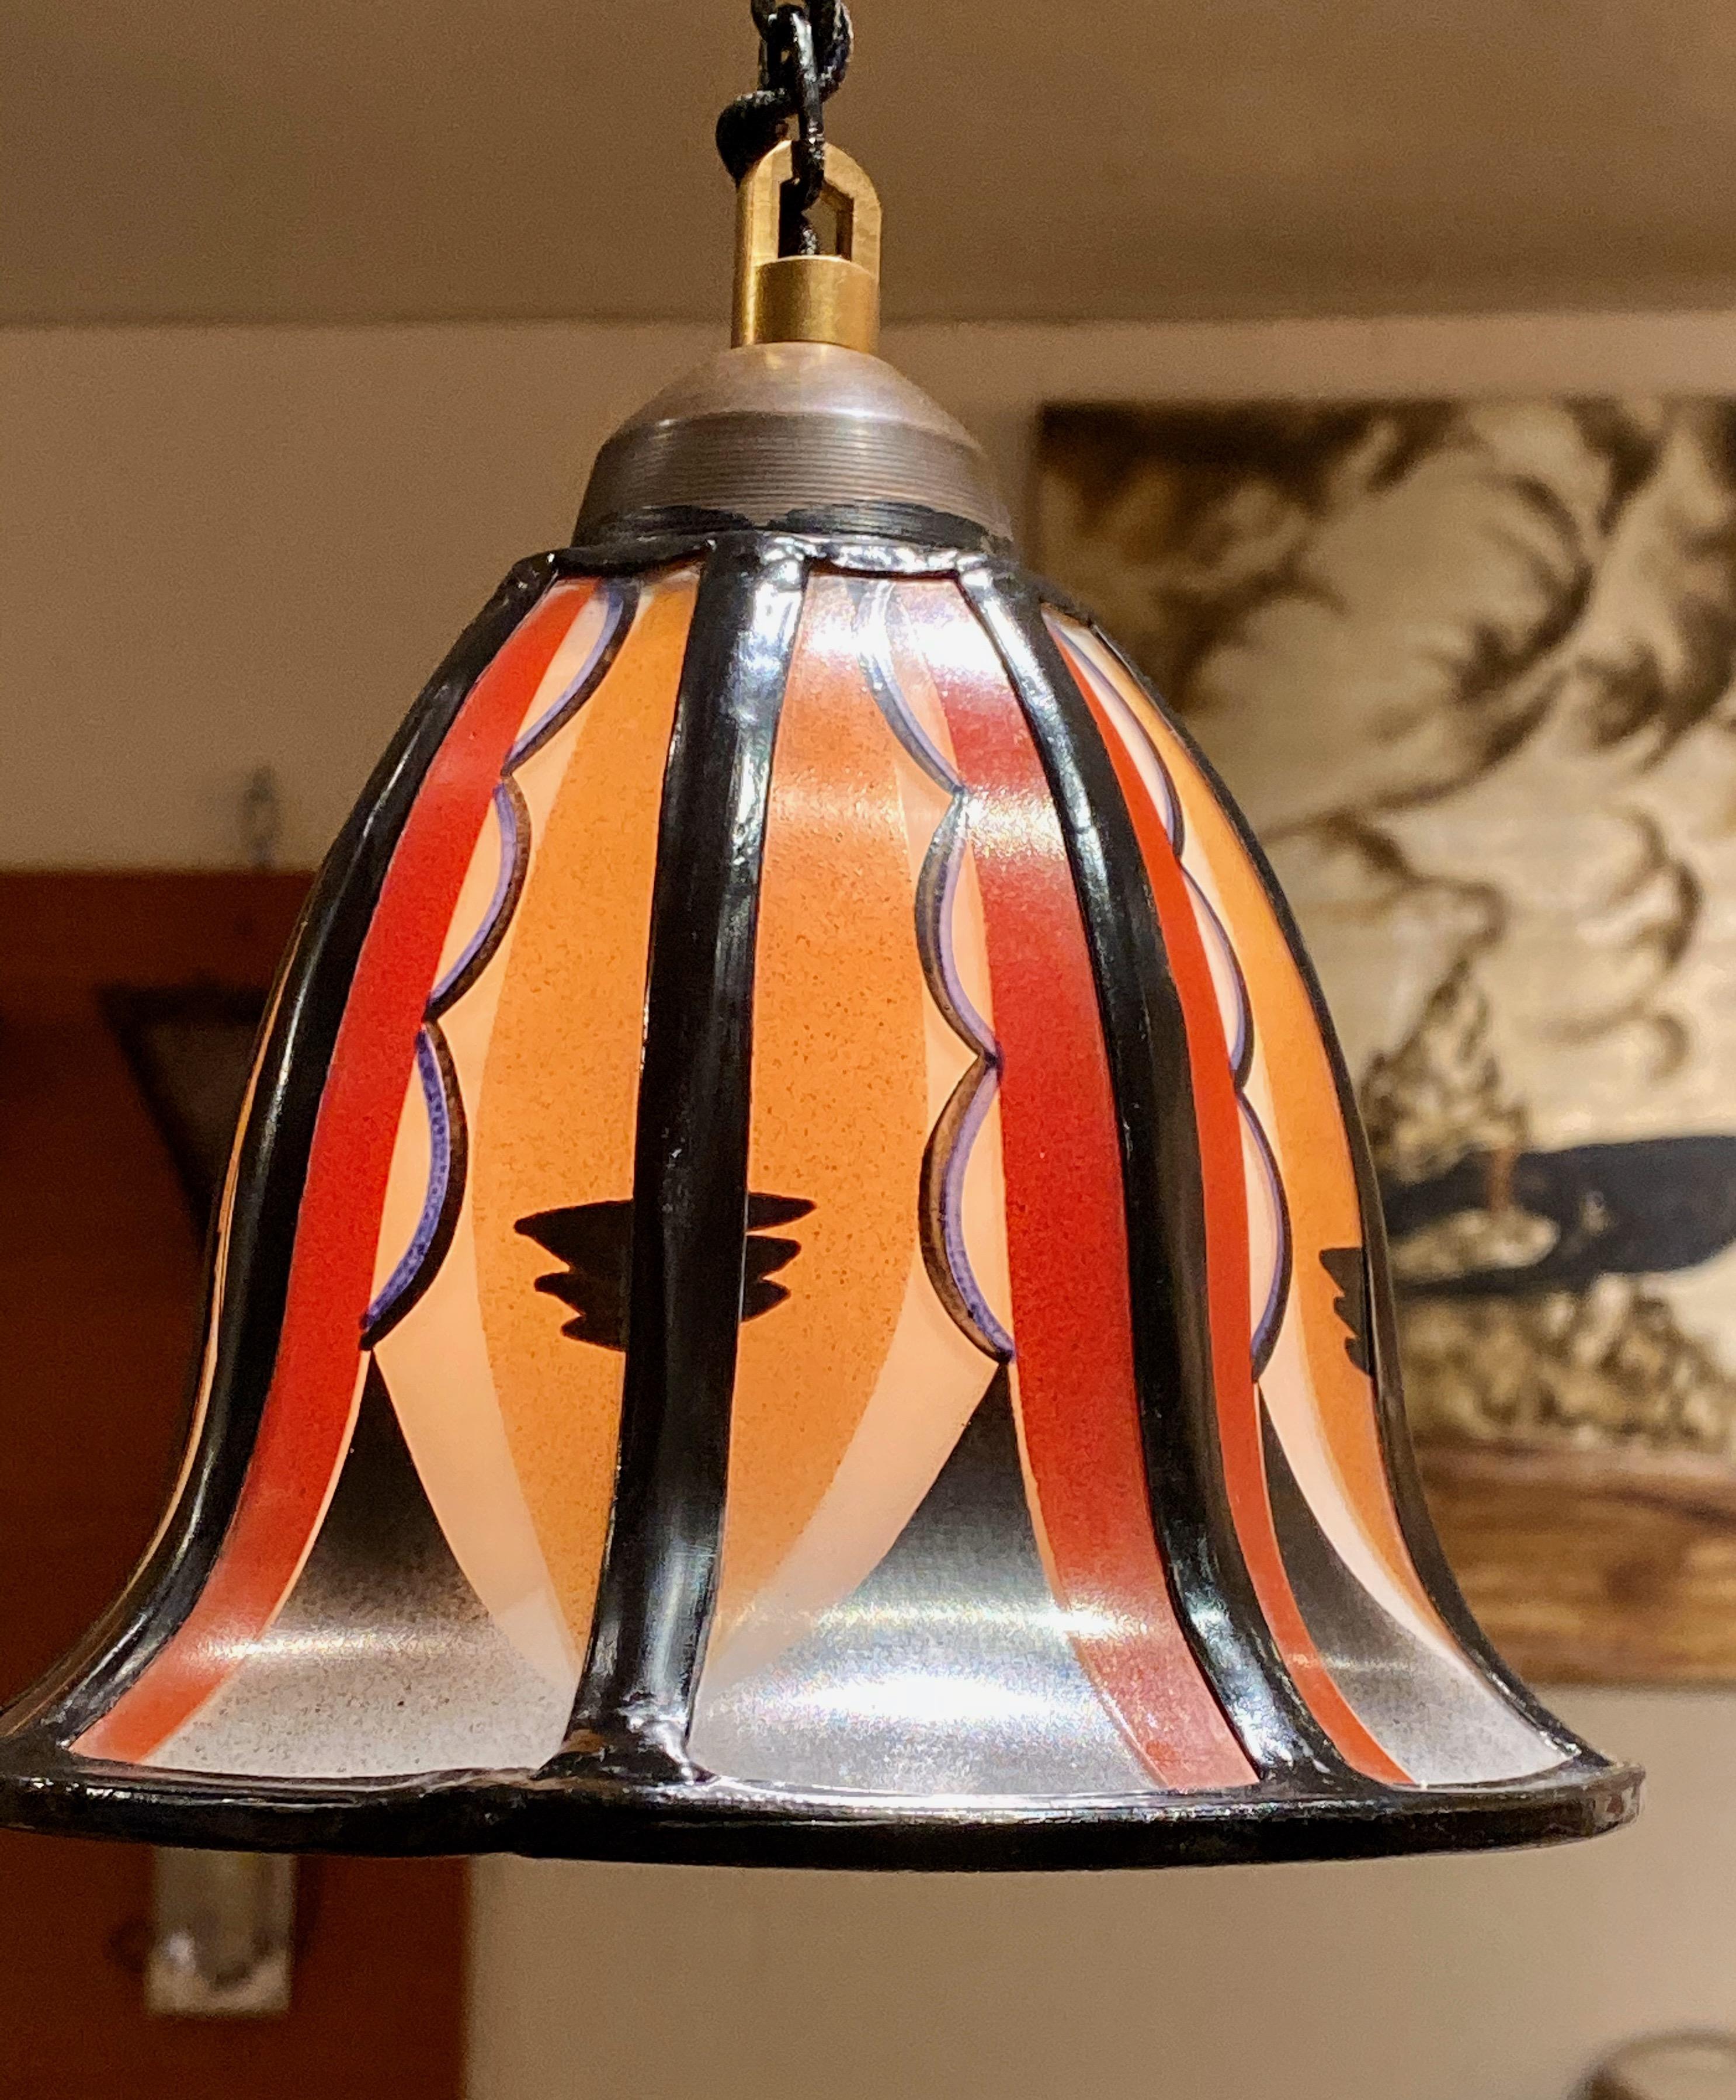 Art Deco Amsterdam School stained glass hanging lamps. Two beautiful Amsterdam School Art Deco stained hanging lamps made by ‘De Nieuwe Honsel’. The stained glass lamps have a length, including the suspension, of 37.5? But could easily be adjust to